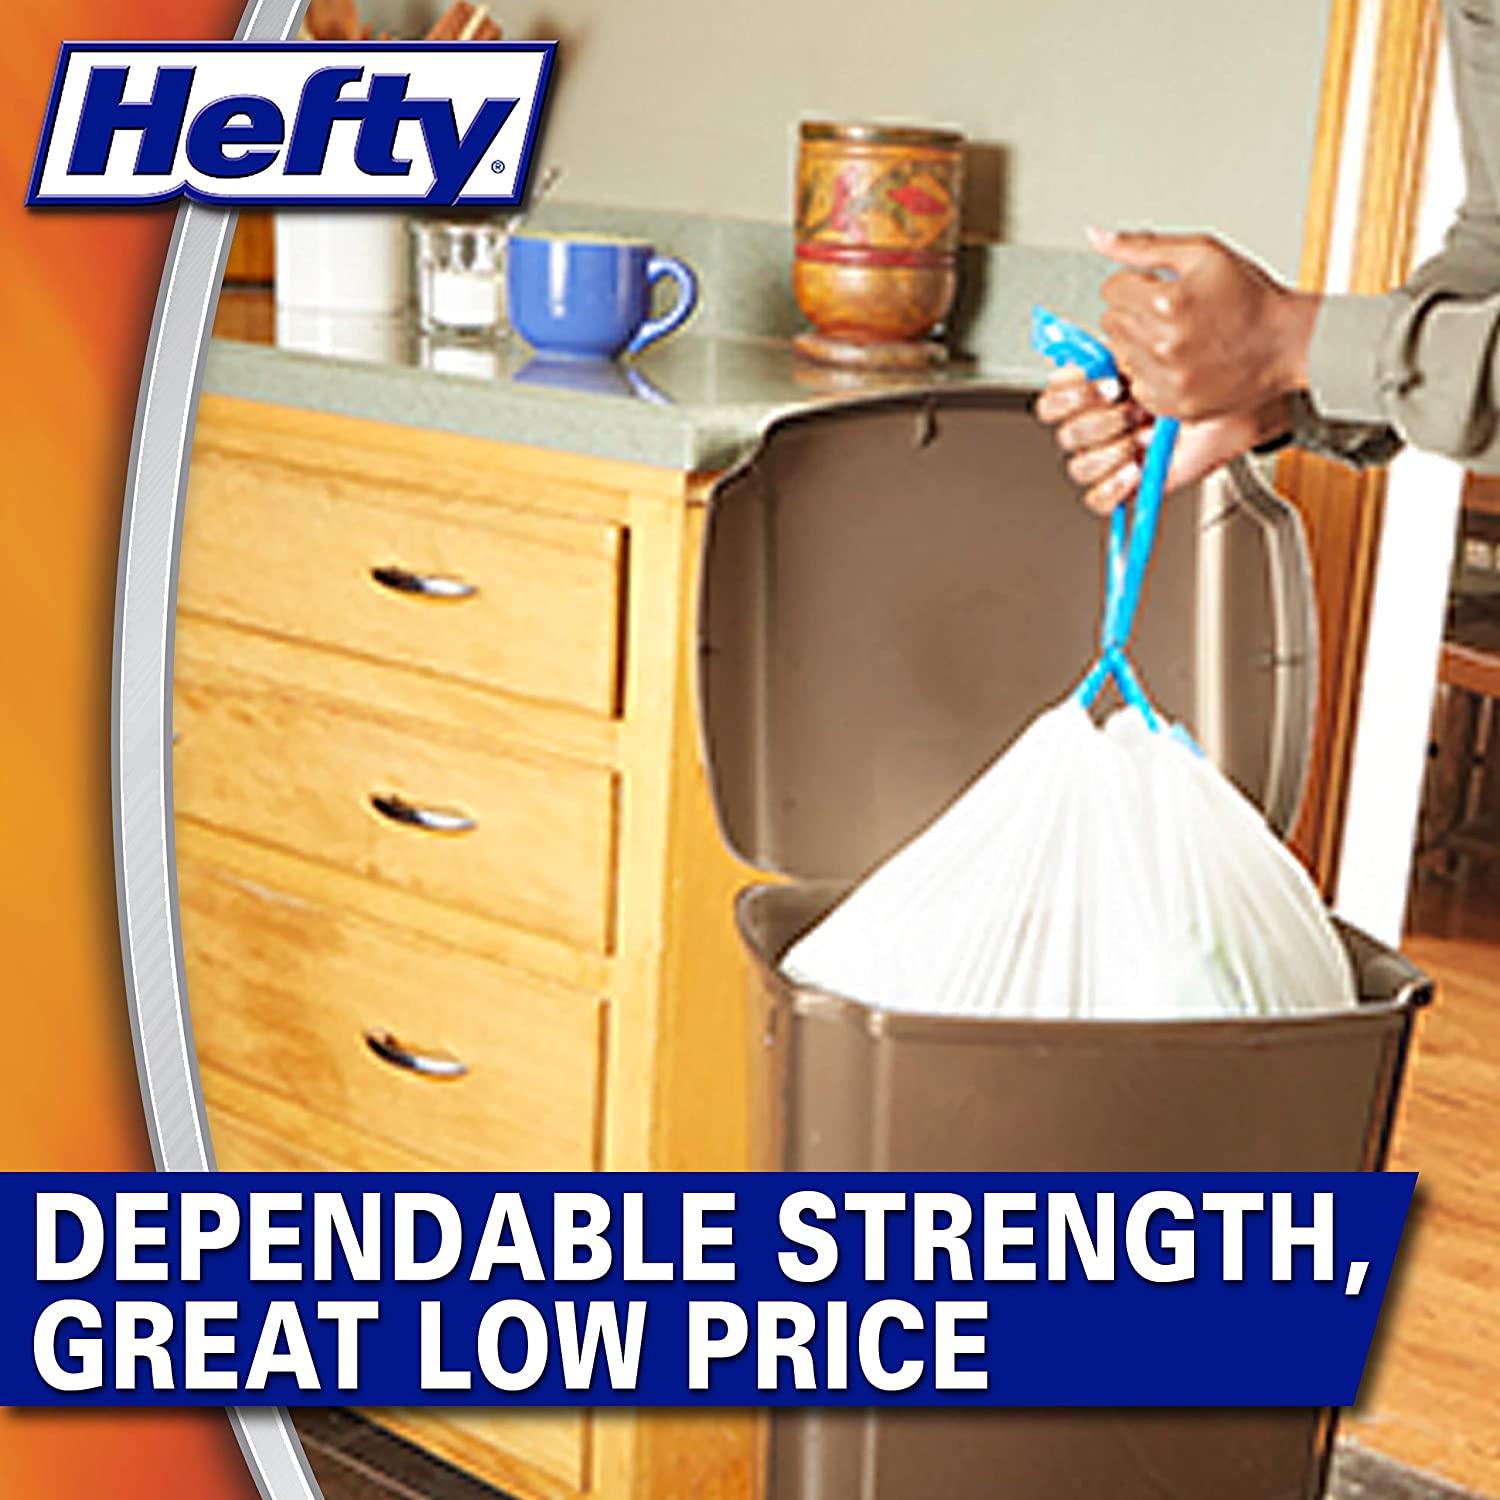 Hefty Ultra Strong Scent Free Tall Kitchen 13 Gallon, Trash Bags